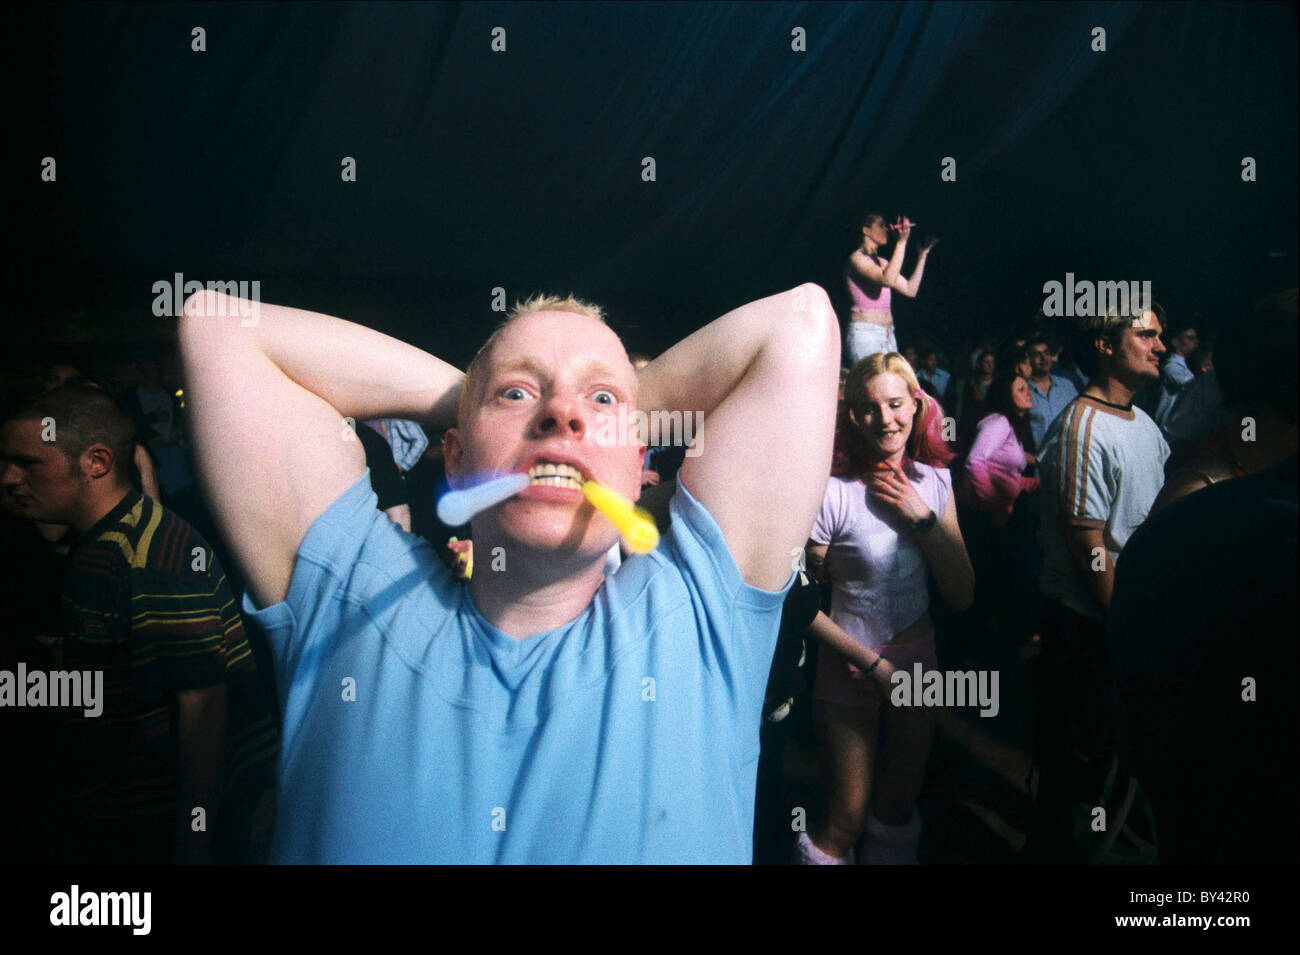 Man in night club holding glow sticks in his mouth. Stock Photo